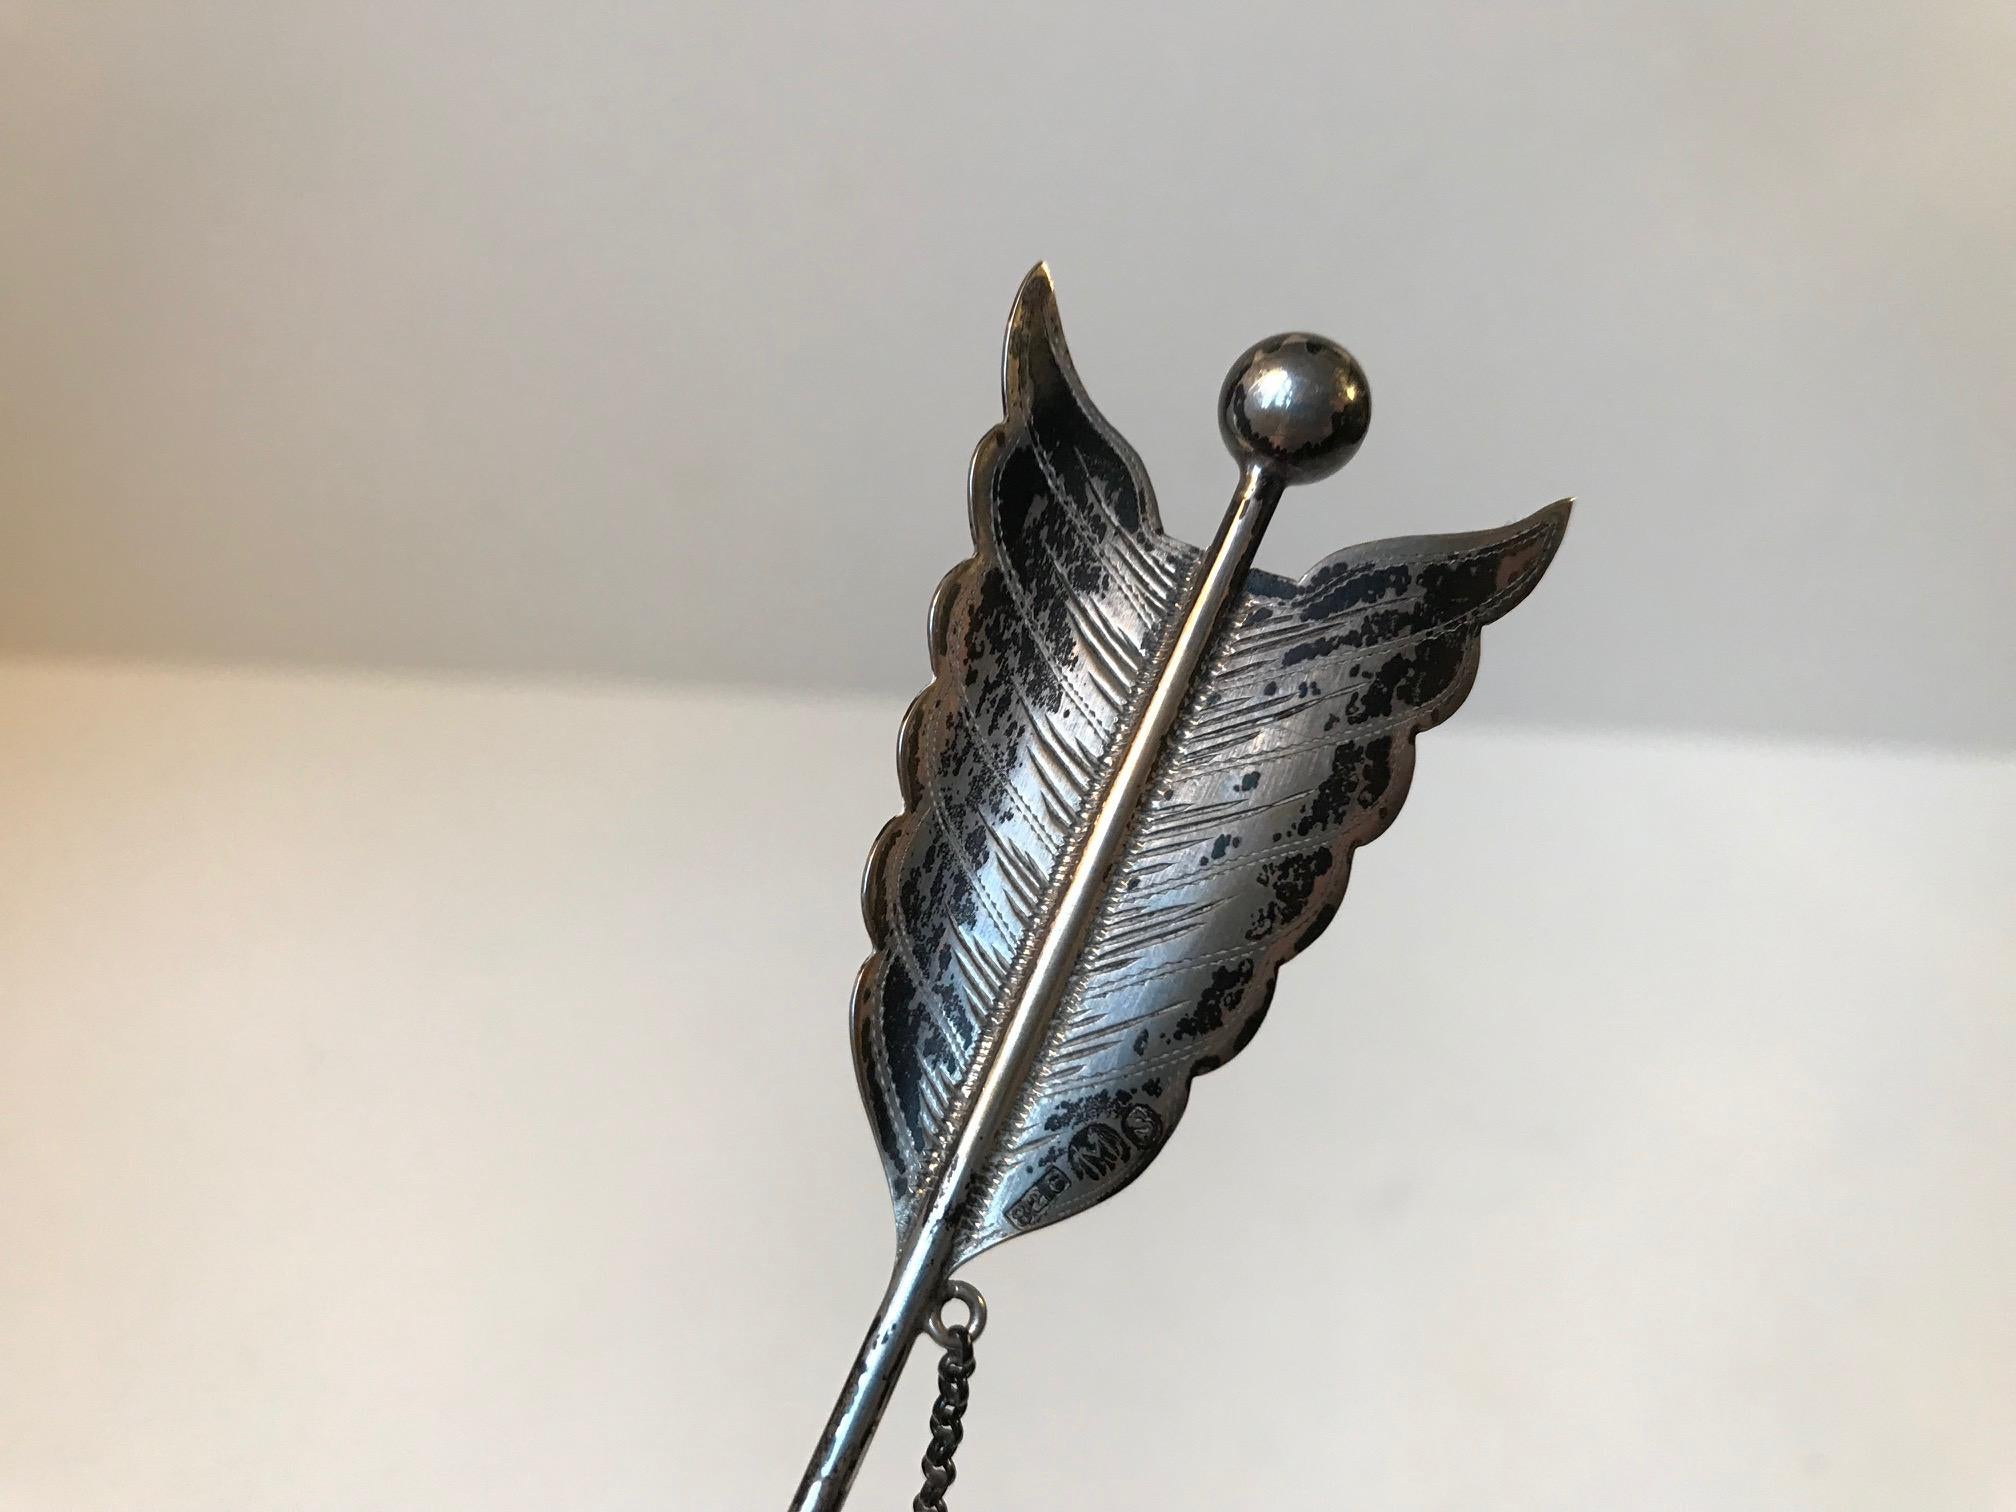 Large antique arrow shaped Hatpin or Brooch for Knitwear by Danish Silversmith Marius Sørensen. Stamped 826, MS. Please note that this item has not been polished.